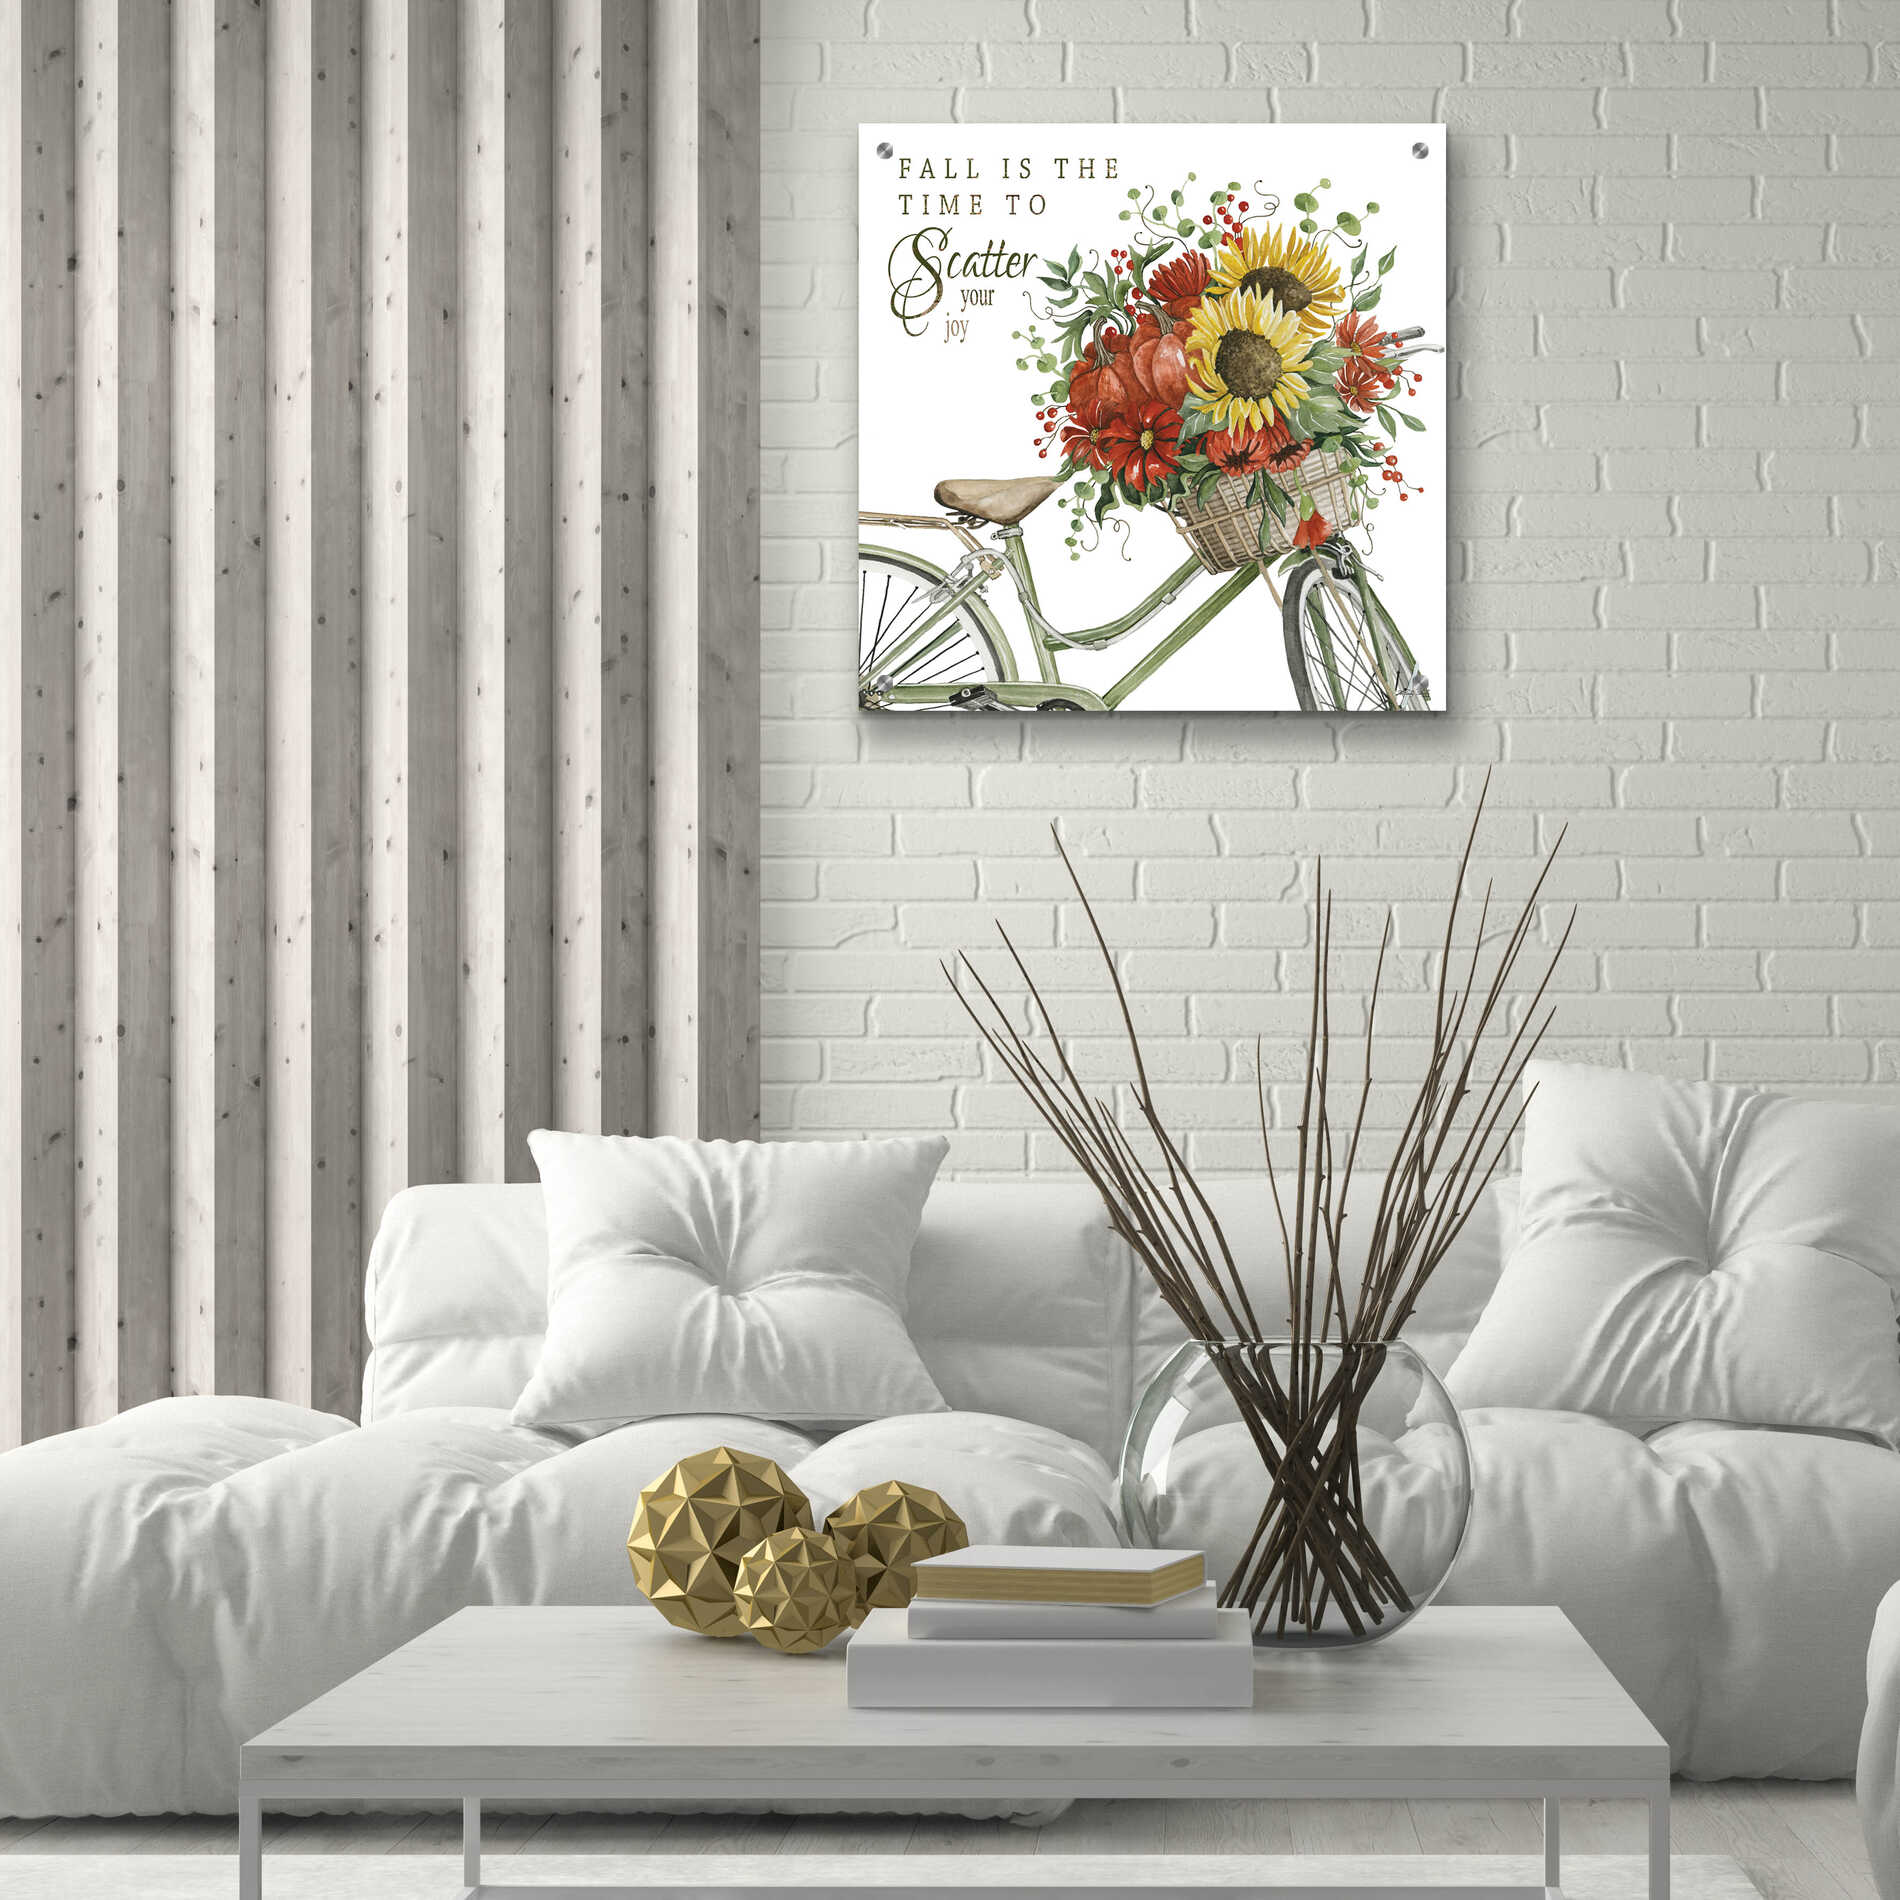 Epic Art 'Fall Is The Time To Scatter Your Joy' by Cindy Jacobs, Acrylic Glass Wall Art,24x24